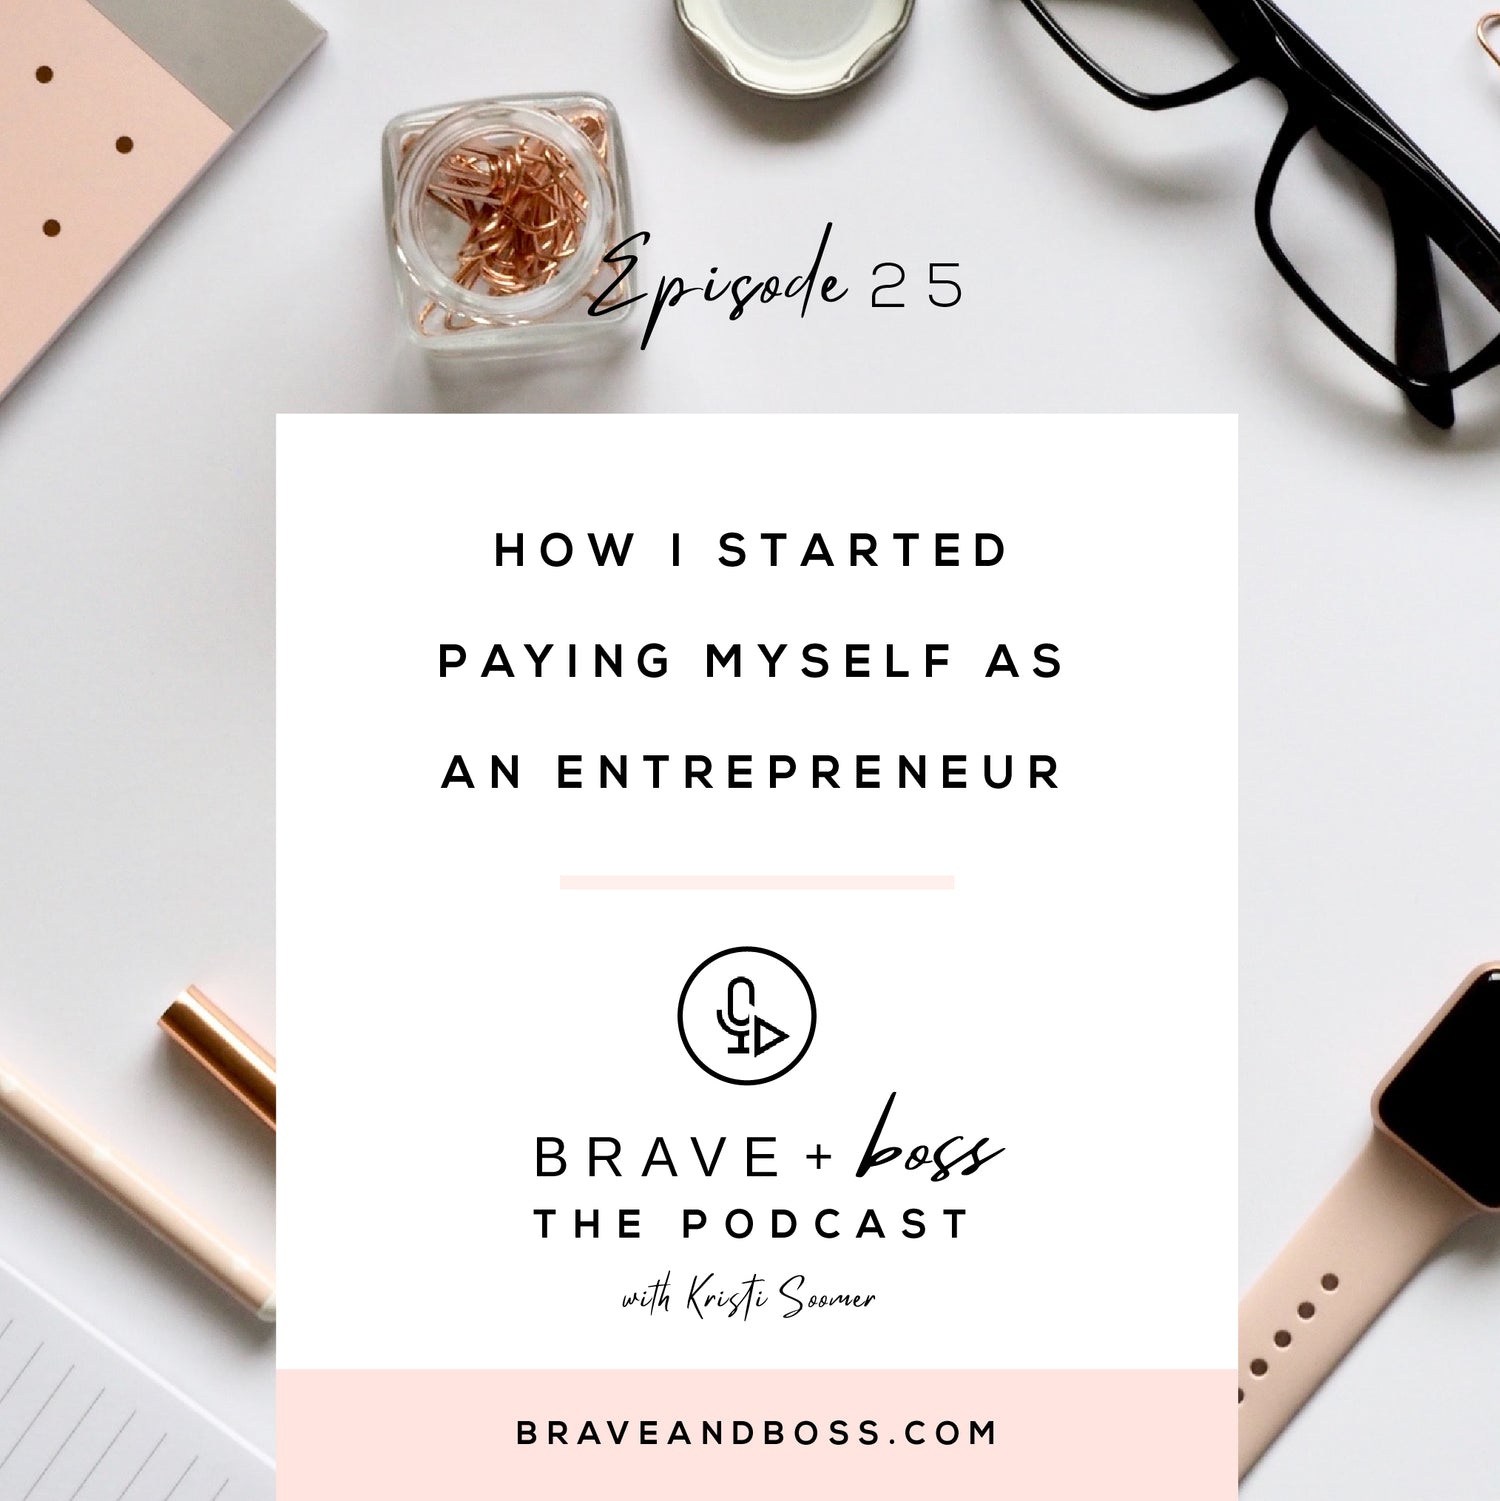 How I Started Paying Myself as an Entrepreneur